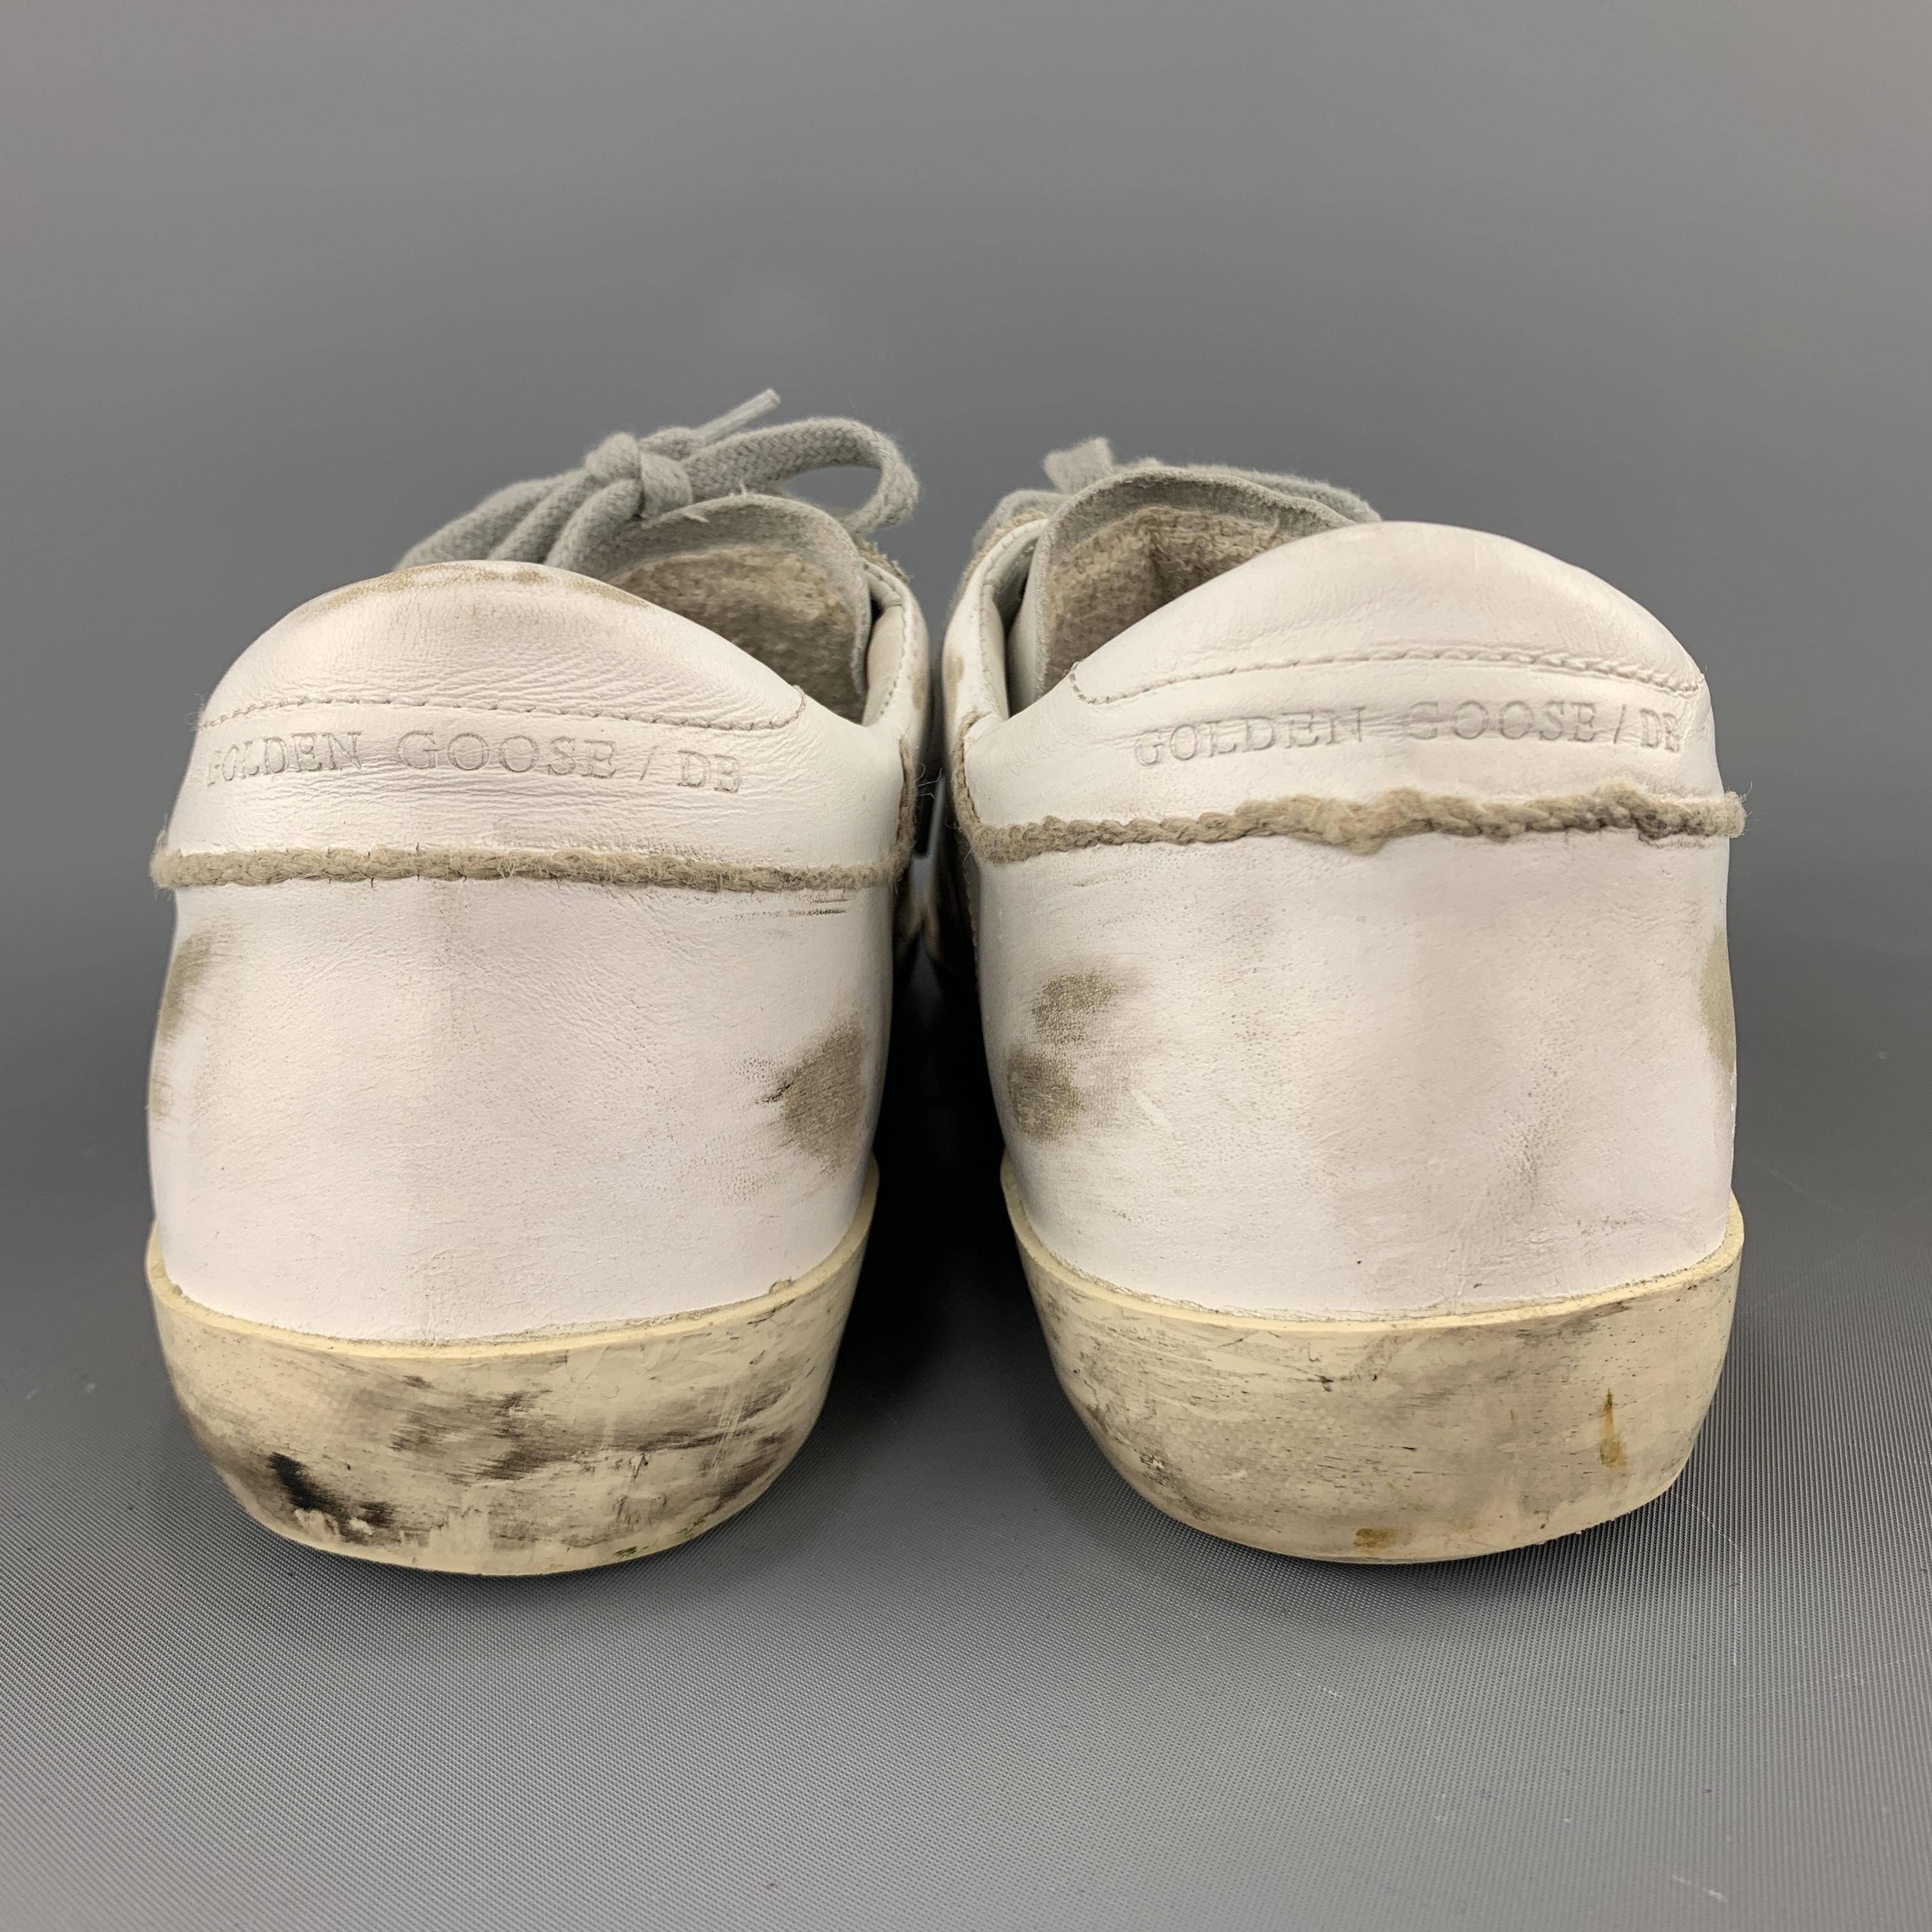 GOLDEN GOOSE Private SHoes Sport Size 10 White Leather Distressed SUPERSTAR Snea In Excellent Condition In San Francisco, CA